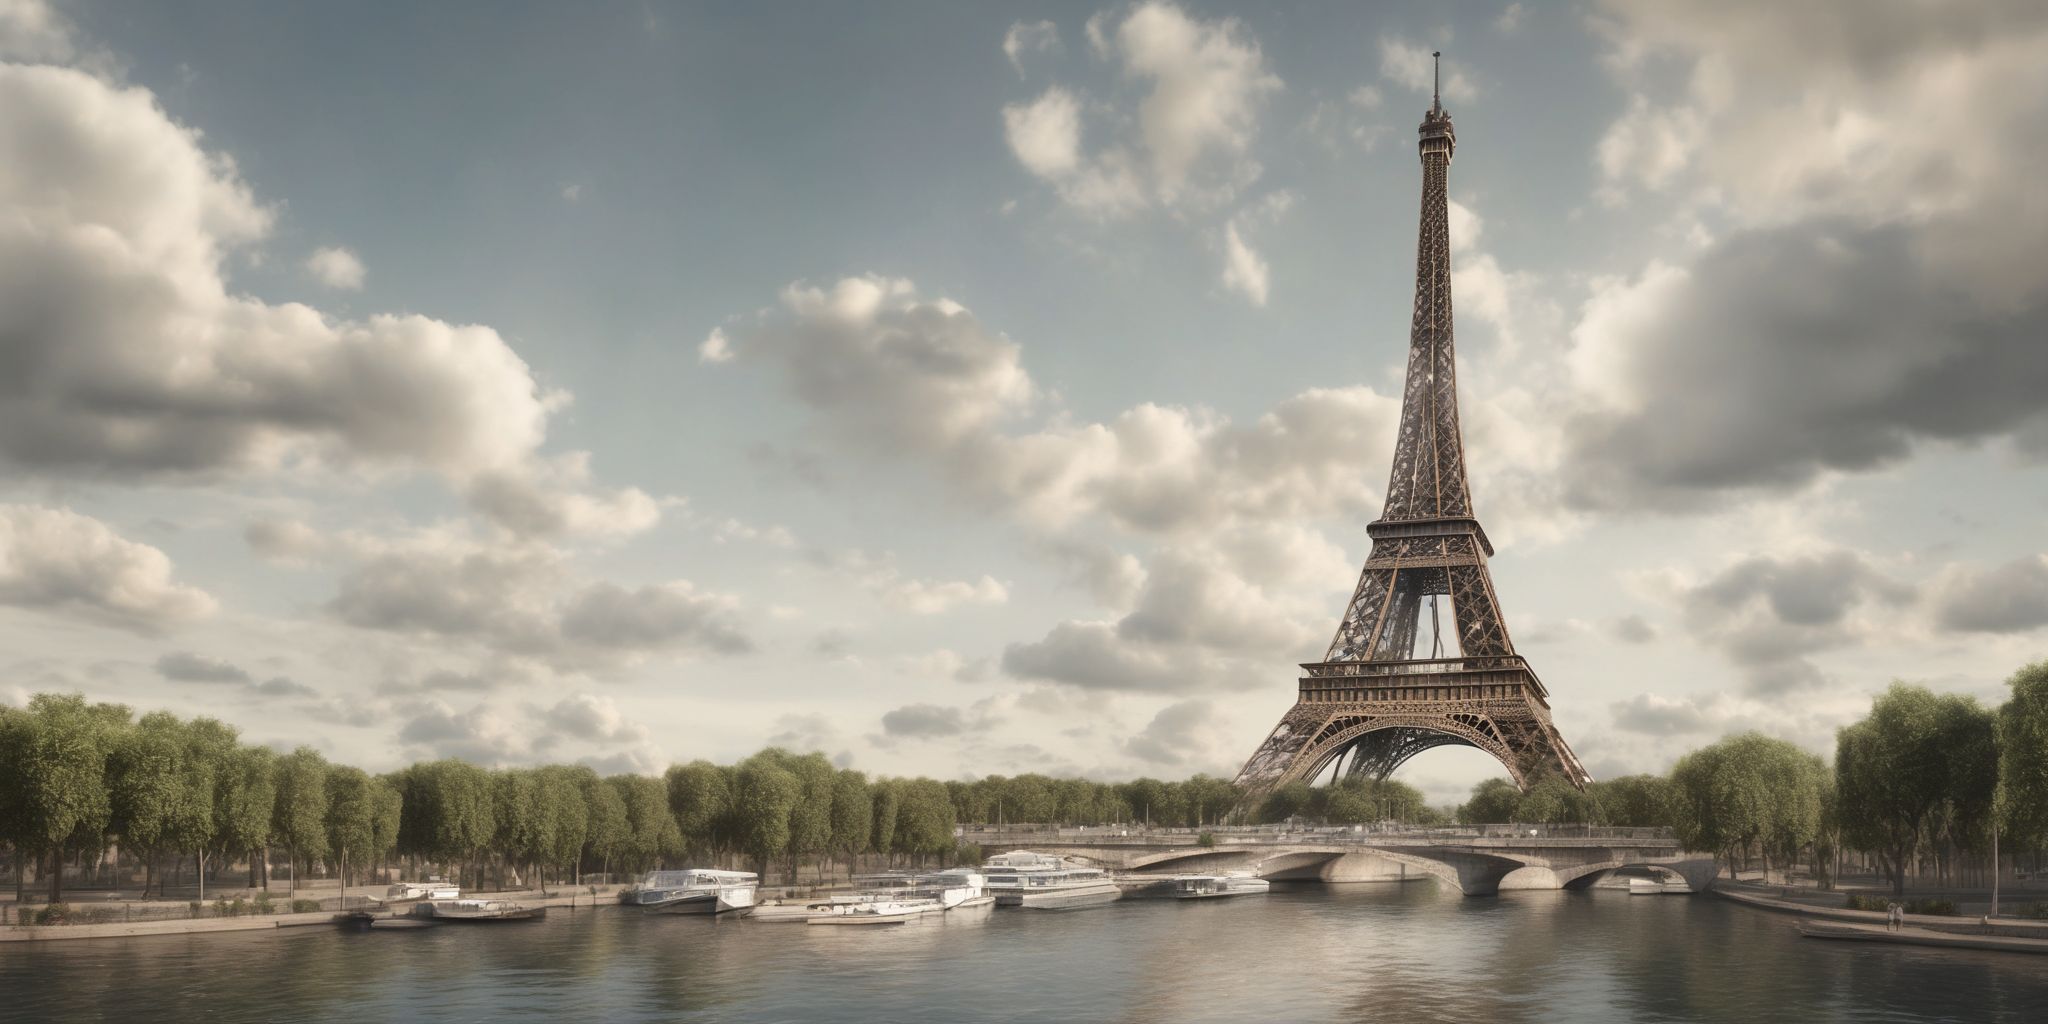 Eiffel Tower  in realistic, photographic style